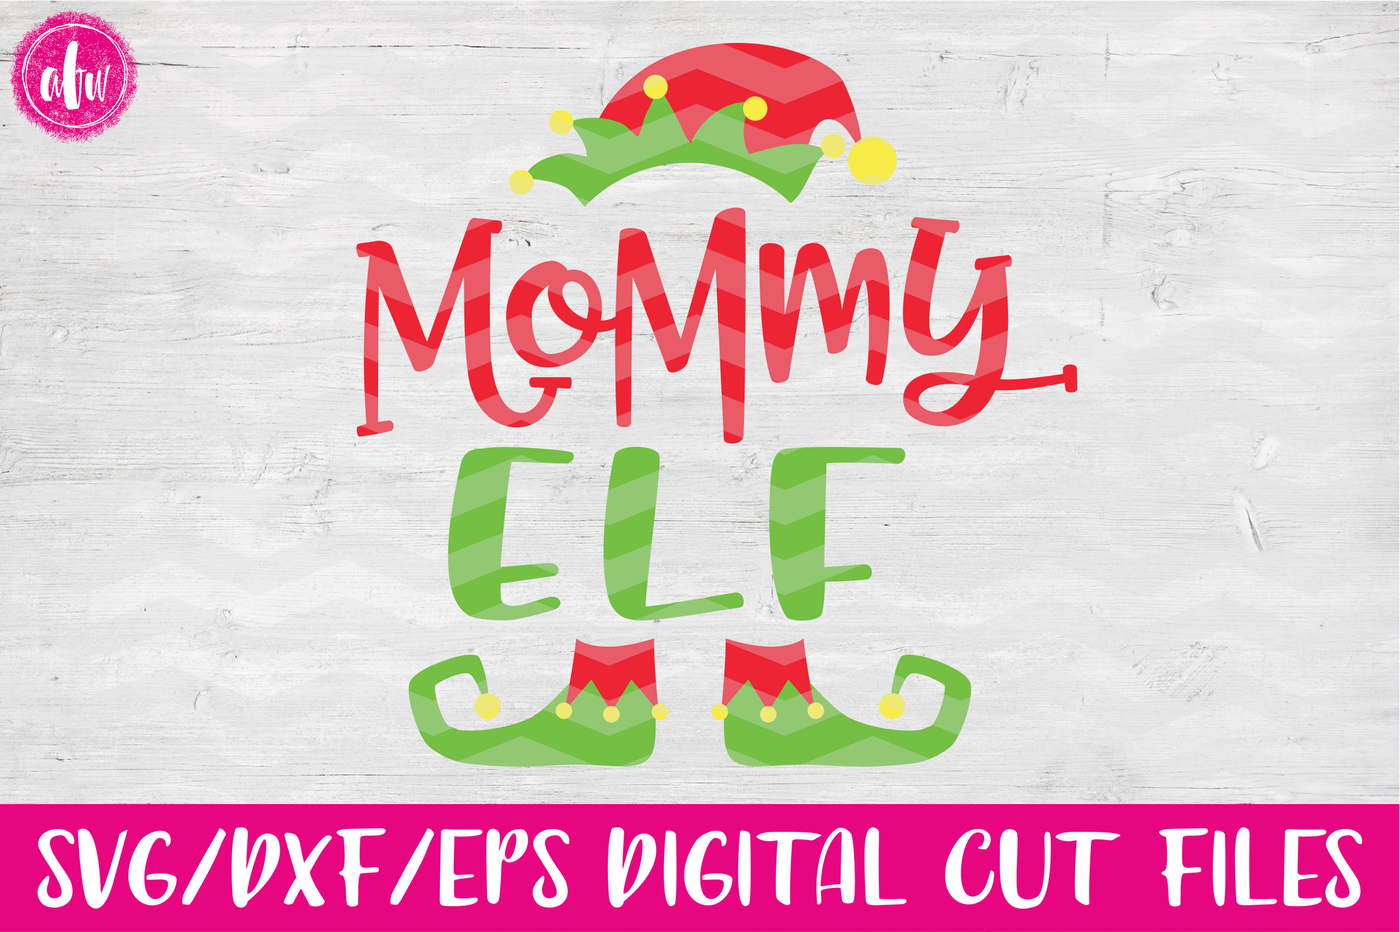 Download Mommy Elf - SVG, DXF, EPS Cut File By AFW Designs | TheHungryJPEG.com